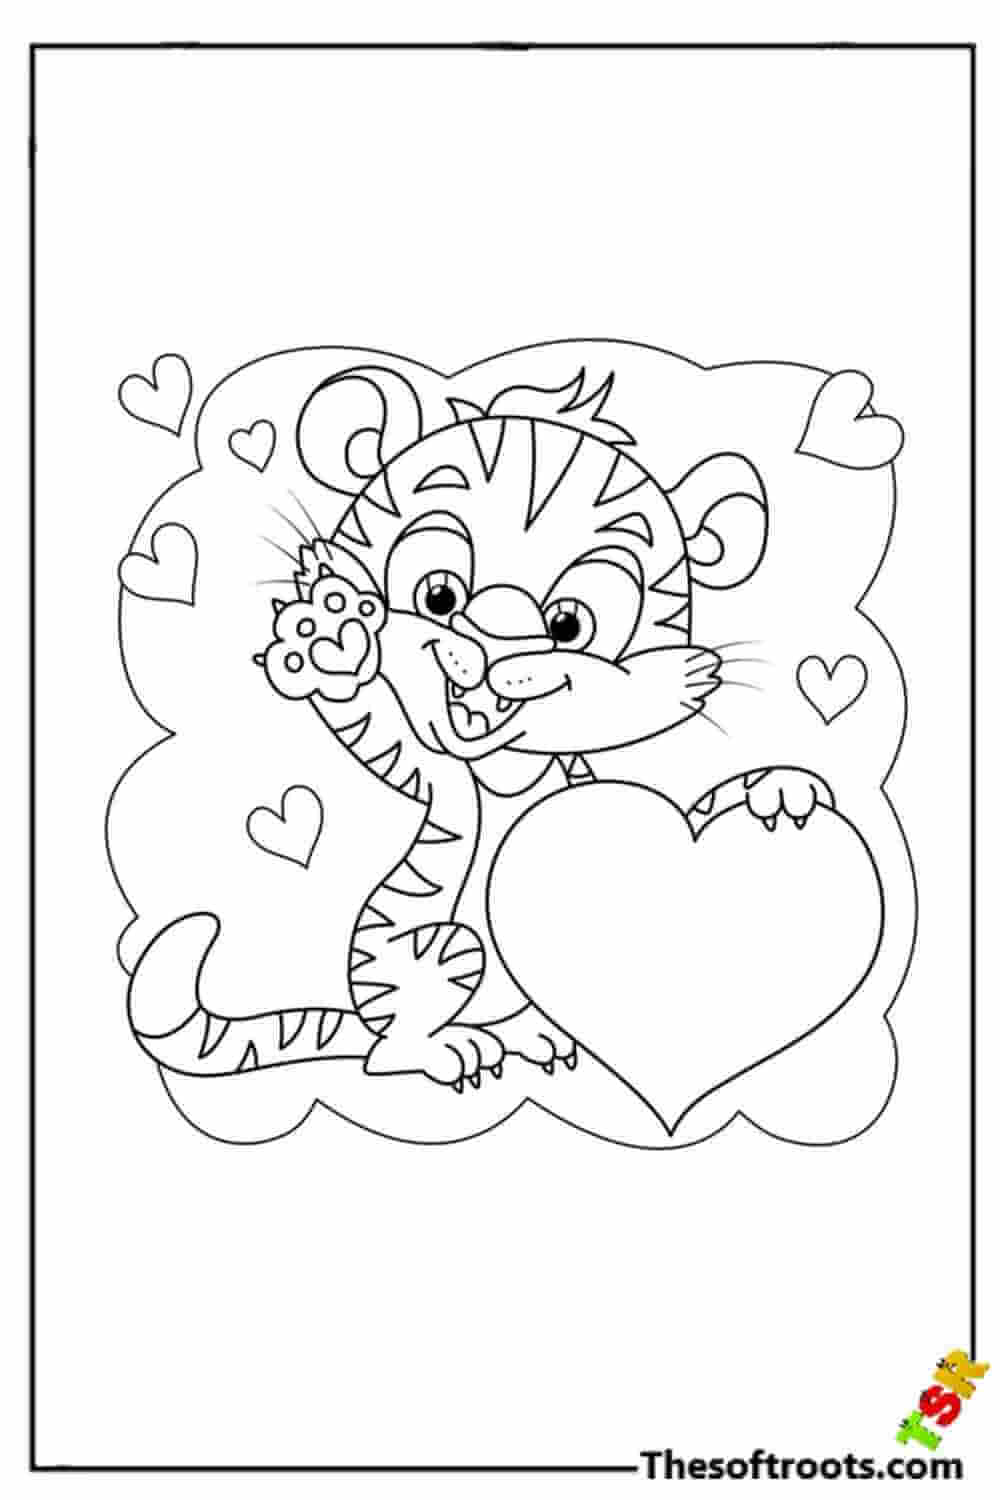 Lovely Tiger coloring pages